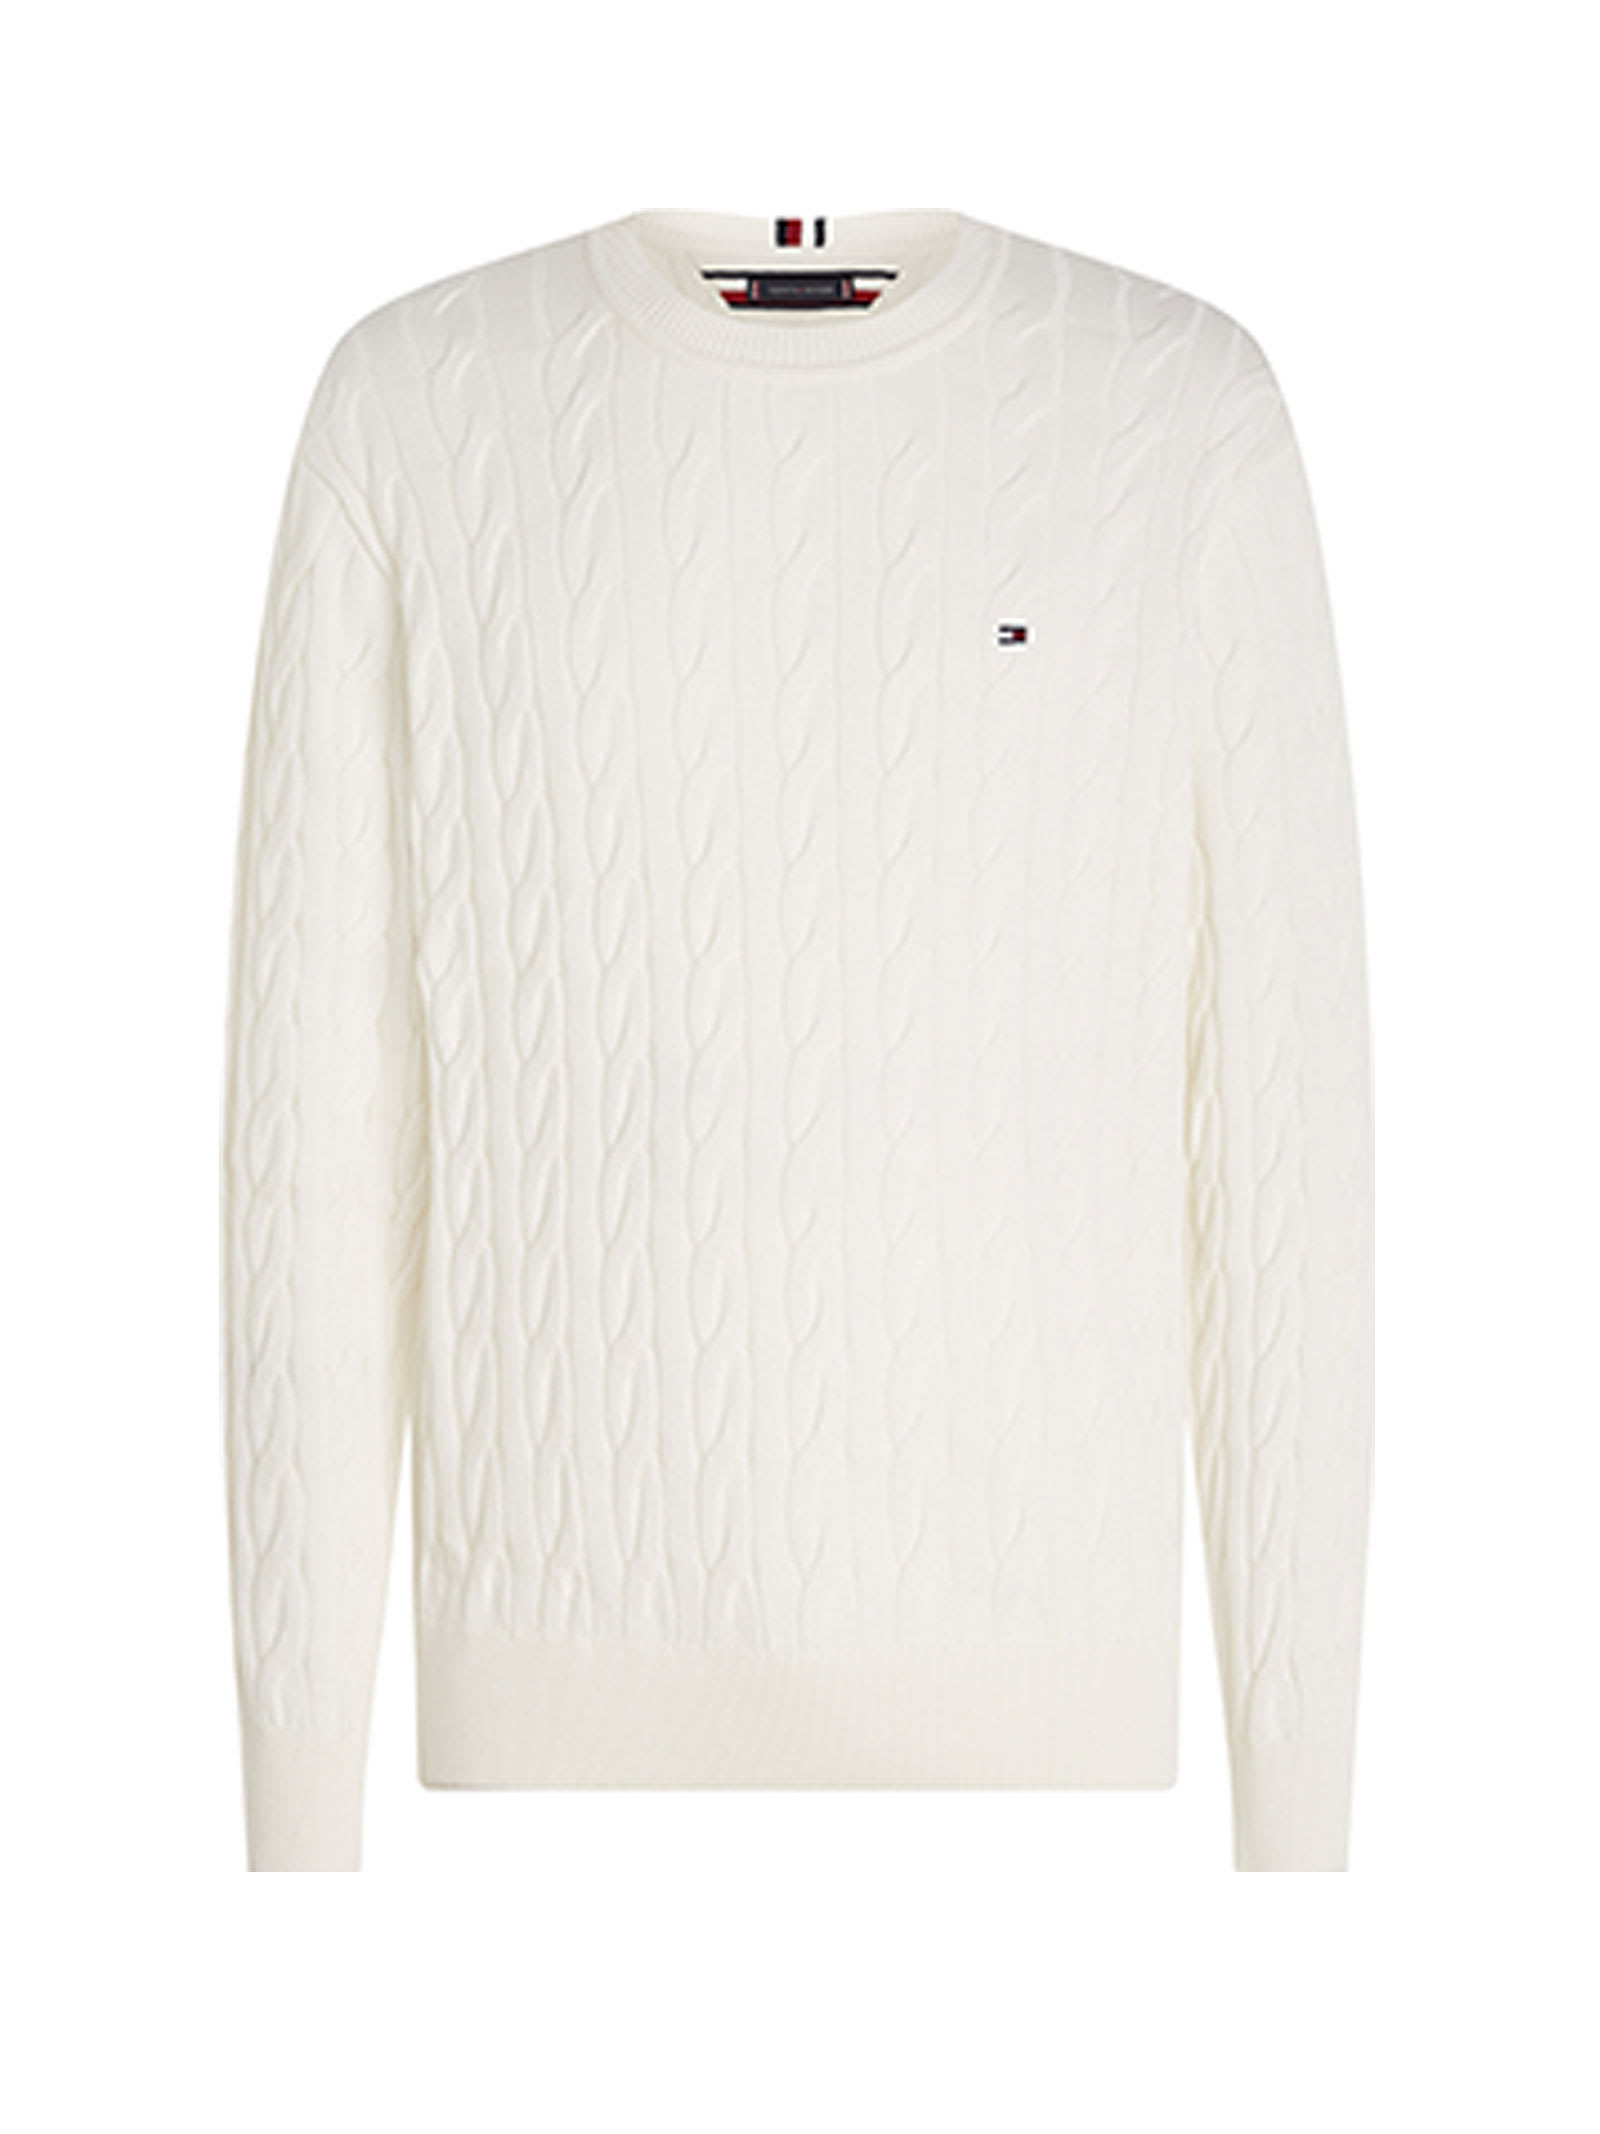 TOMMY HILFIGER WHITE CABLE CREW NECK SWEATER